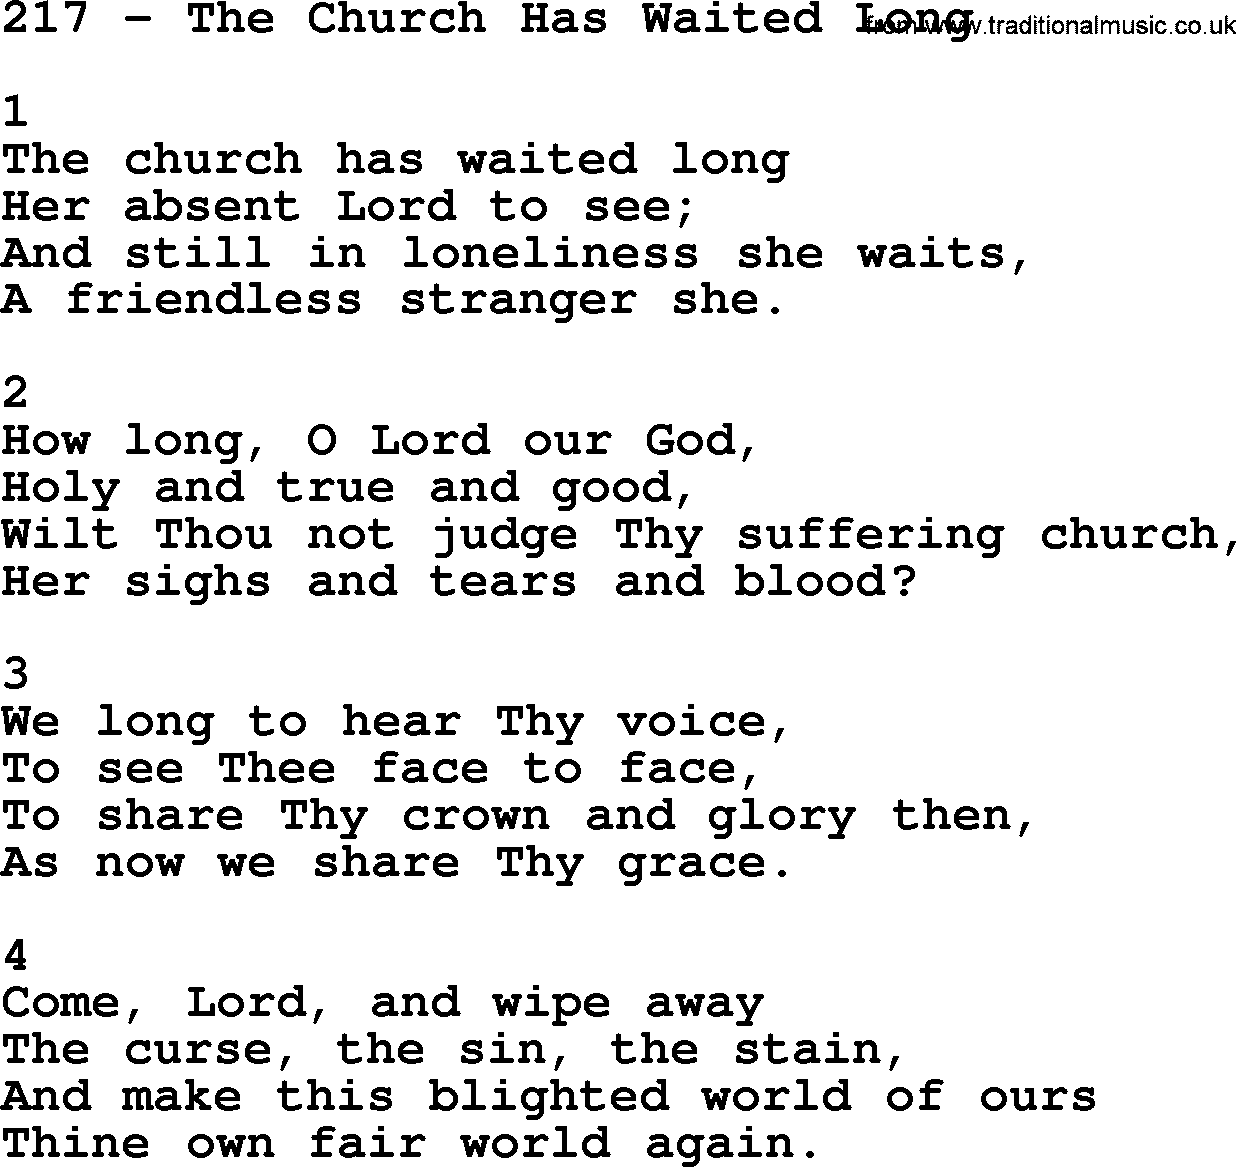 Complete Adventis Hymnal, title: 217-The Church Has Waited Long, with lyrics, midi, mp3, powerpoints(PPT) and PDF,